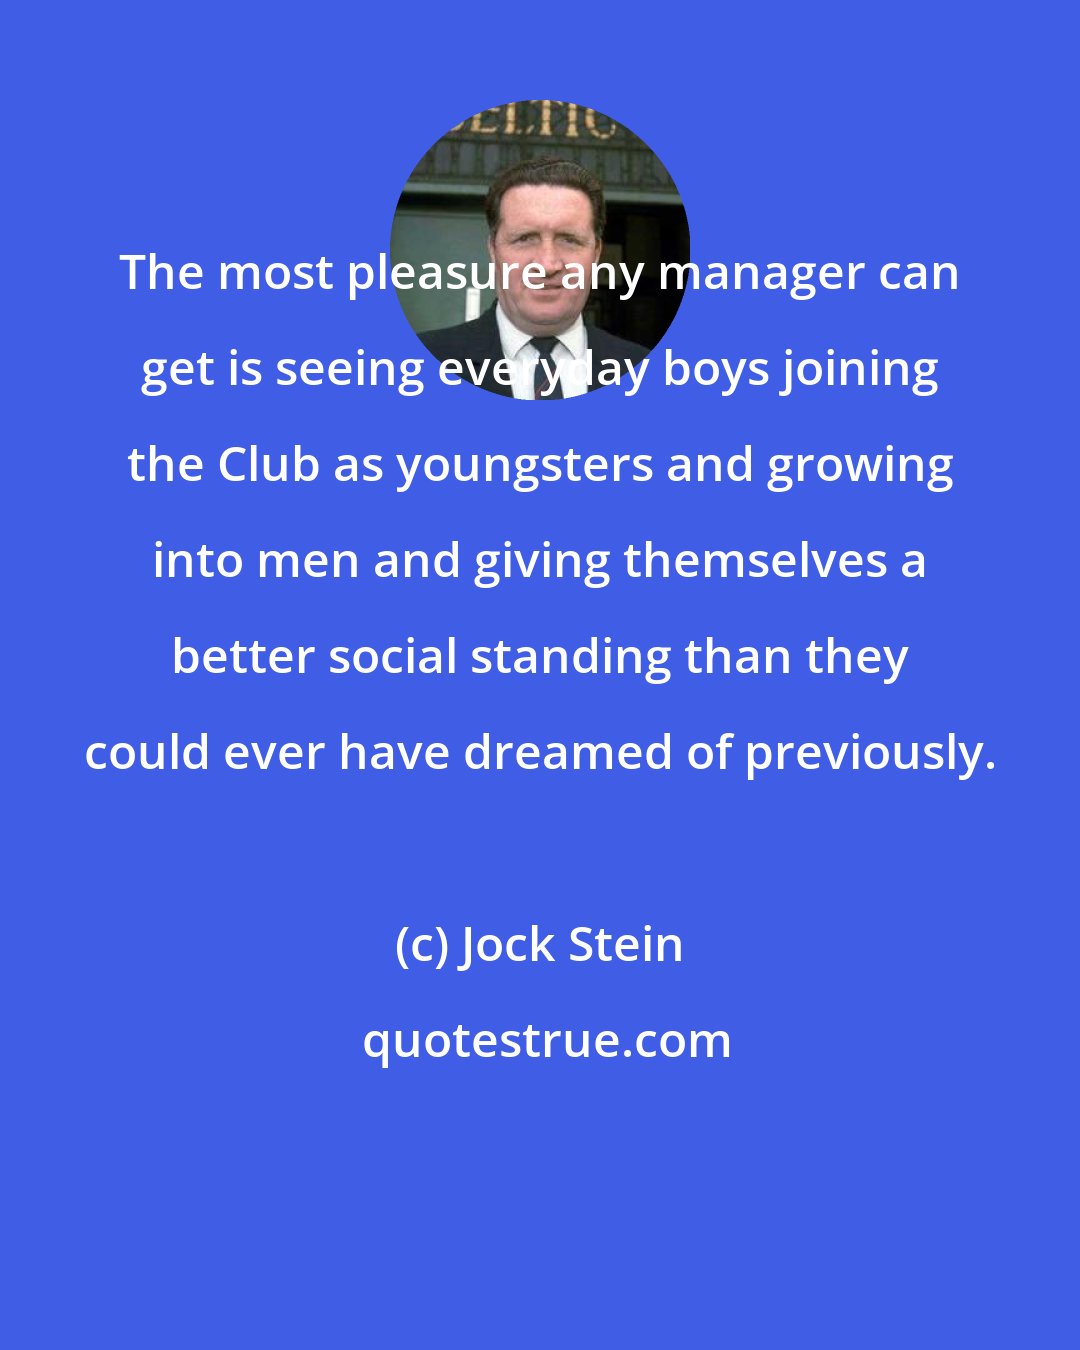 Jock Stein: The most pleasure any manager can get is seeing everyday boys joining the Club as youngsters and growing into men and giving themselves a better social standing than they could ever have dreamed of previously.